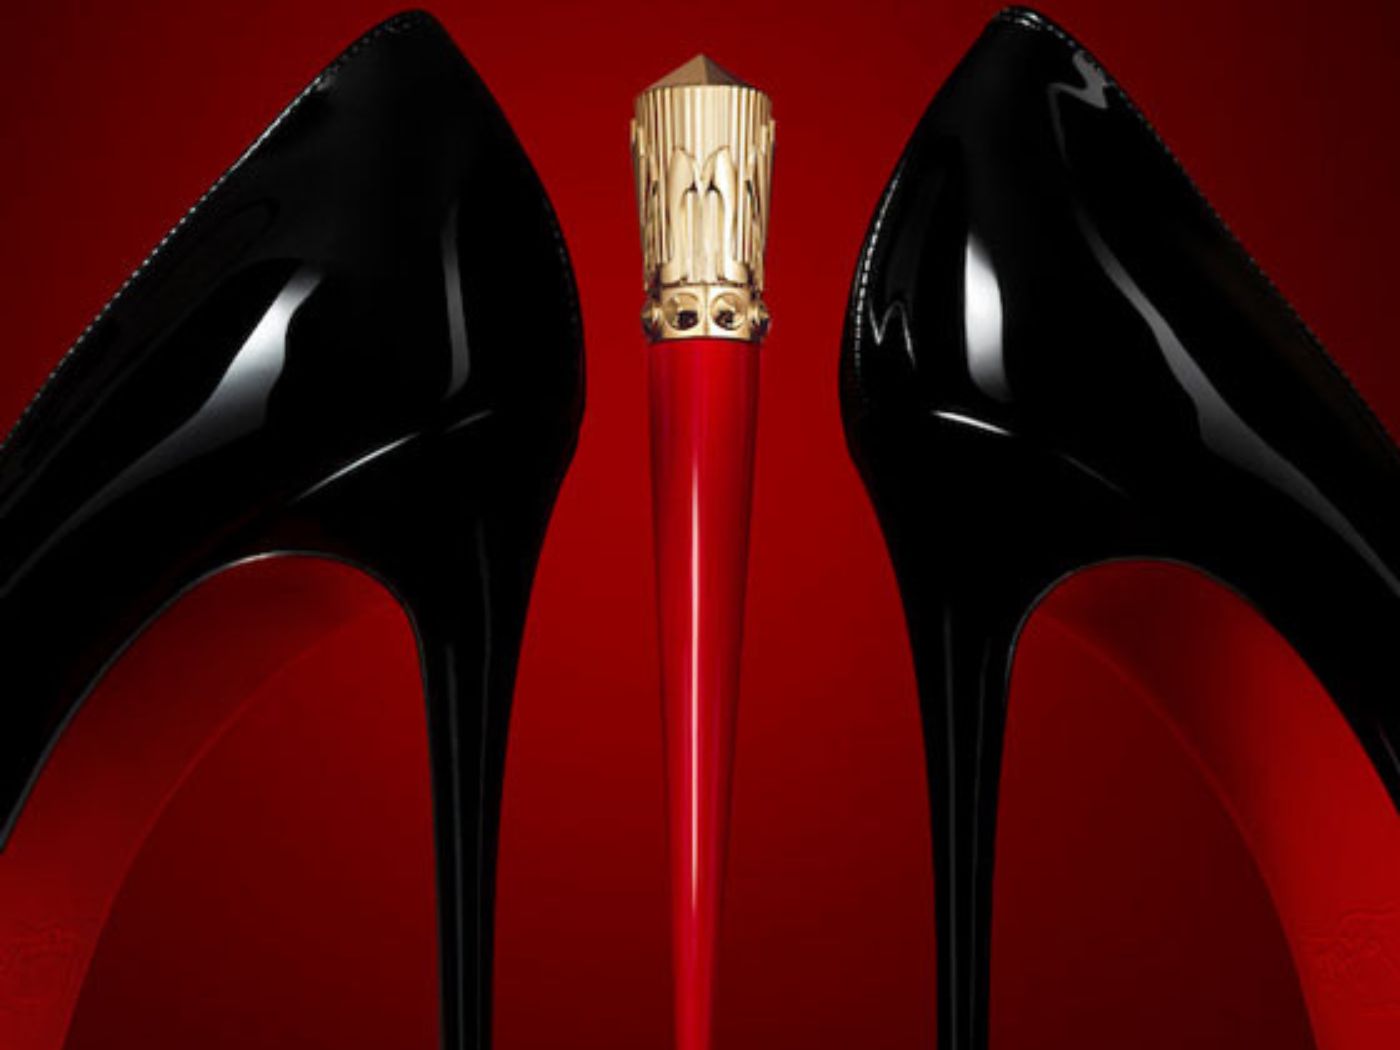 A slim red, stiletto heel-shaped lipstick case positioned between a pair of black Christian Louboutin stilettos with red soles. October Cheat Sheet 2023